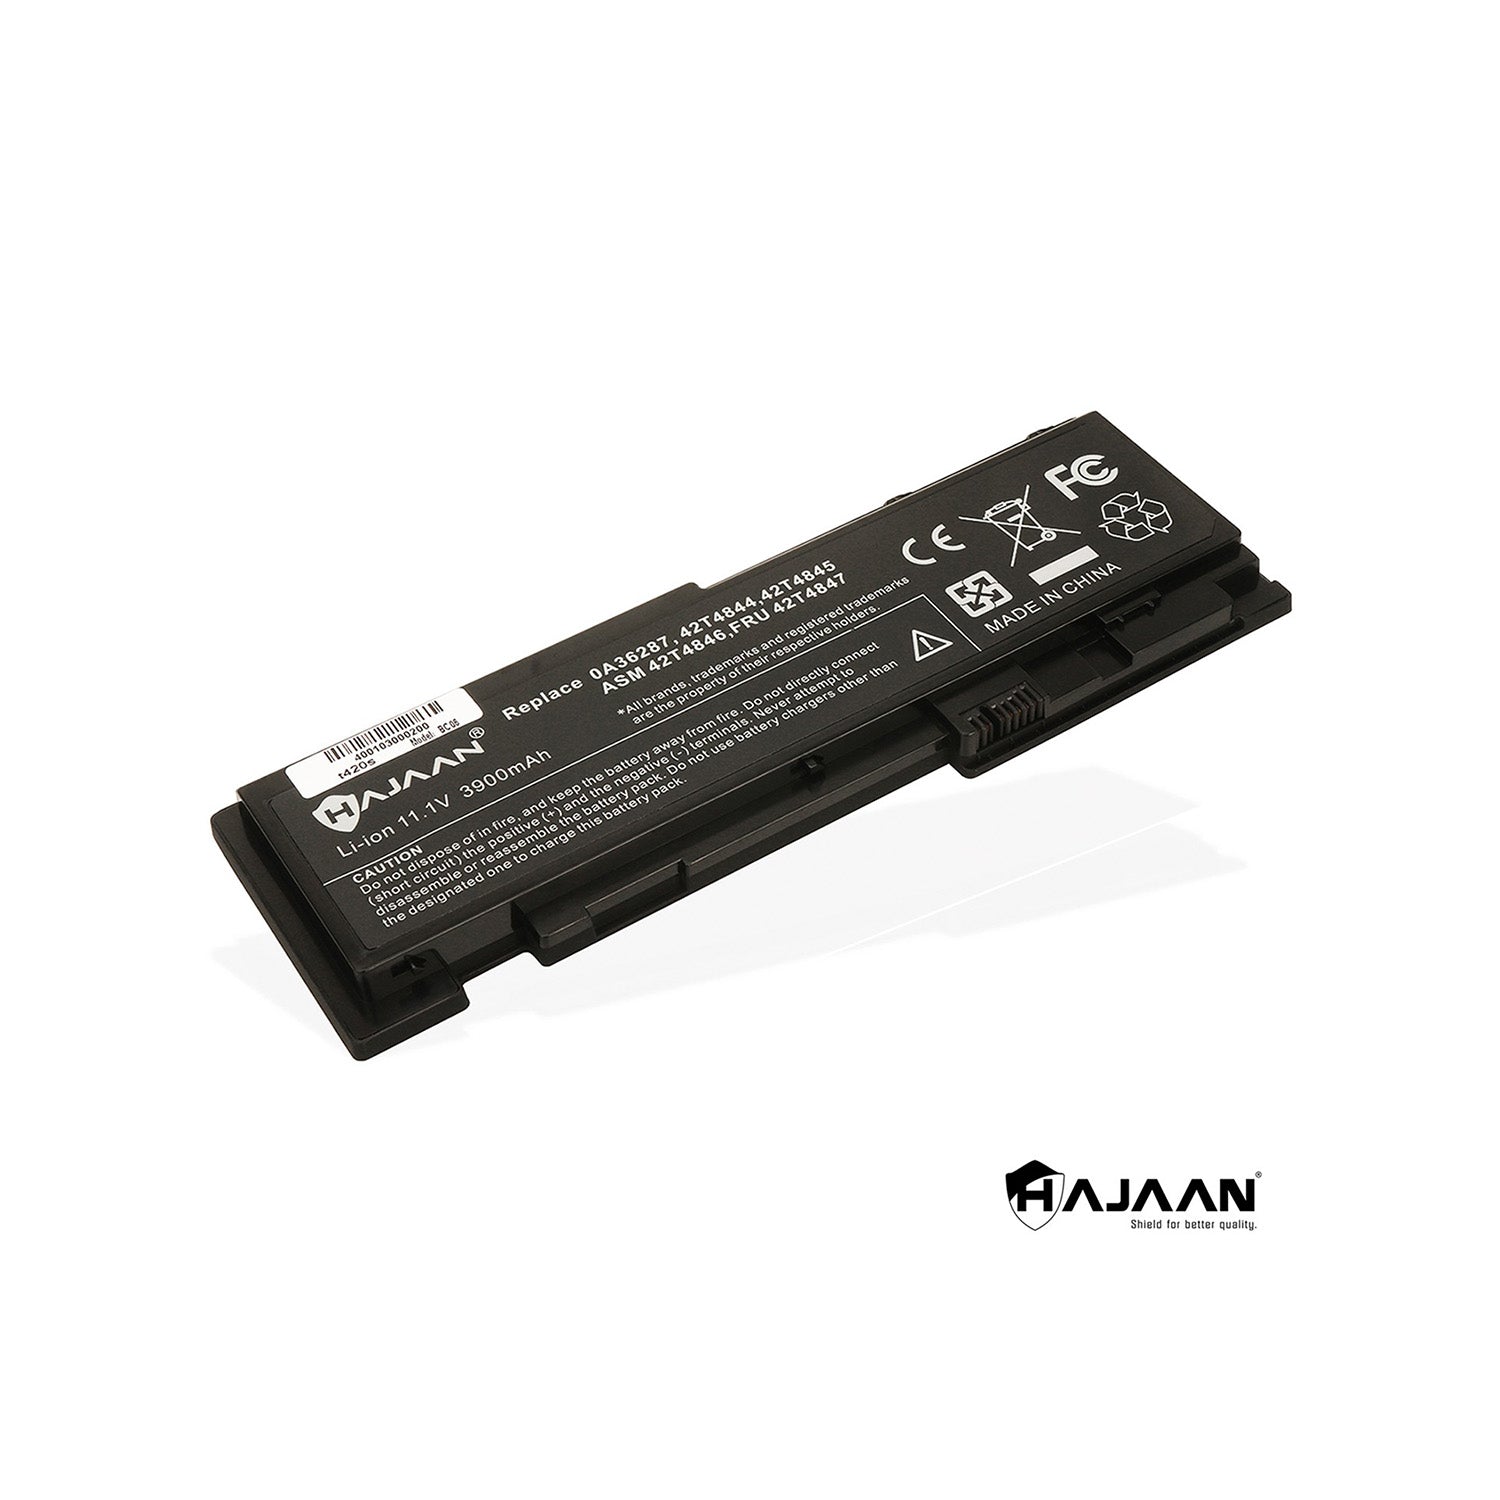 HAJAAN Brand New Replacement Laptop battery for LENOVO ThinkPad T420s T420si T430s T430si 42T4844, 42T4845 (Li-ion, 3900mAh , 6-Cells,11.1V), 1 Year Warranty